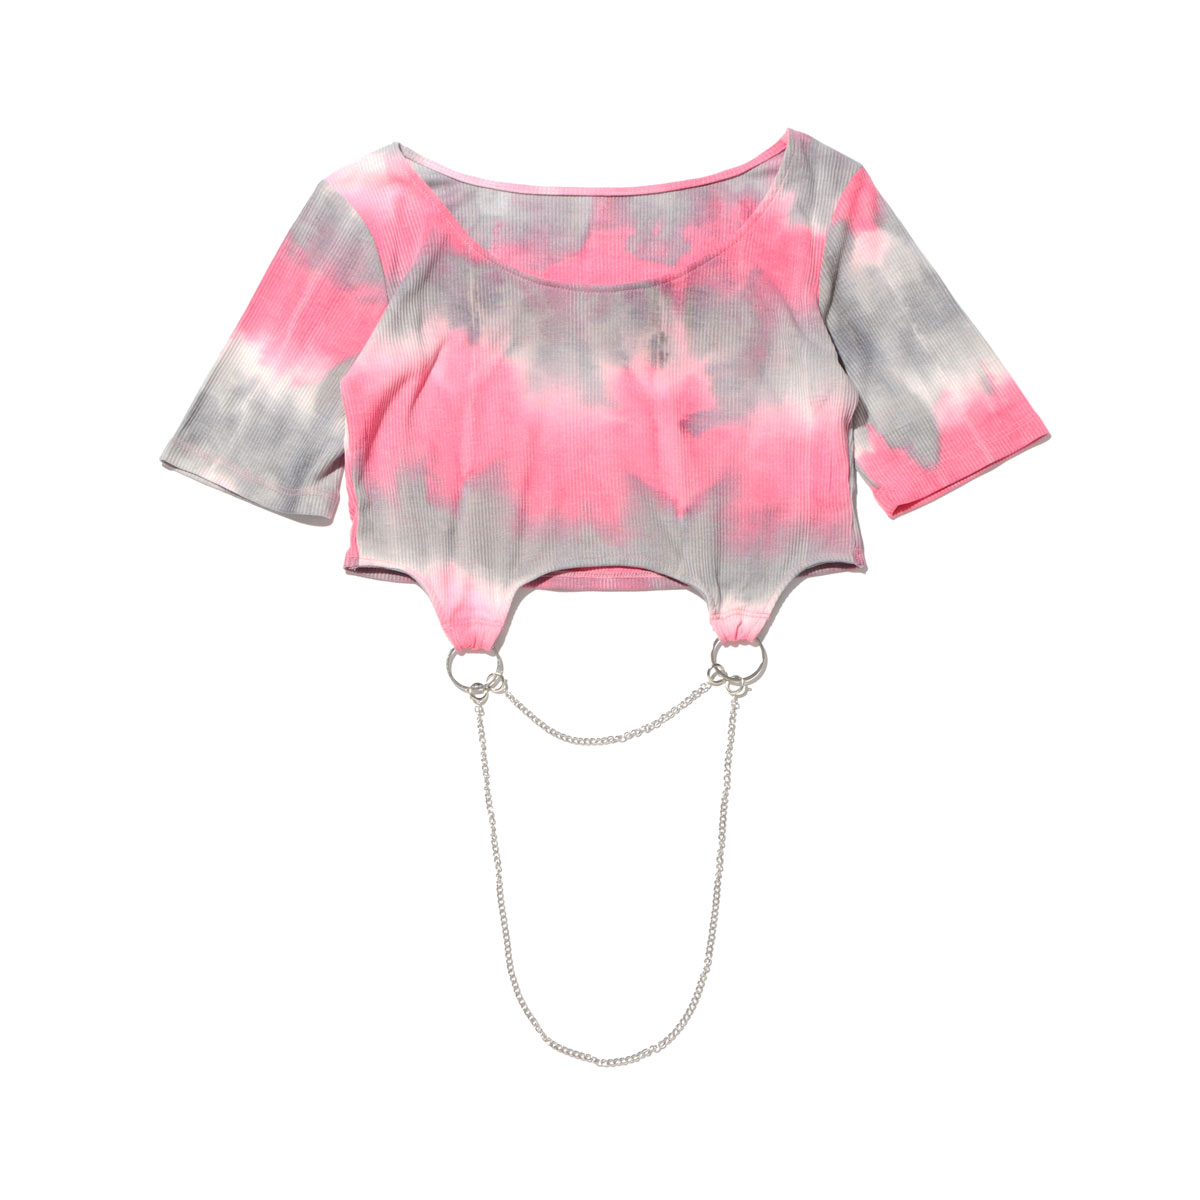 RIEHATA ~ atmos pink tie dye chain cropped tops(Gn^ ~ AgXsN ^C C `F[Nbvh gbvX)PINK fB[X TVc 20SU-S